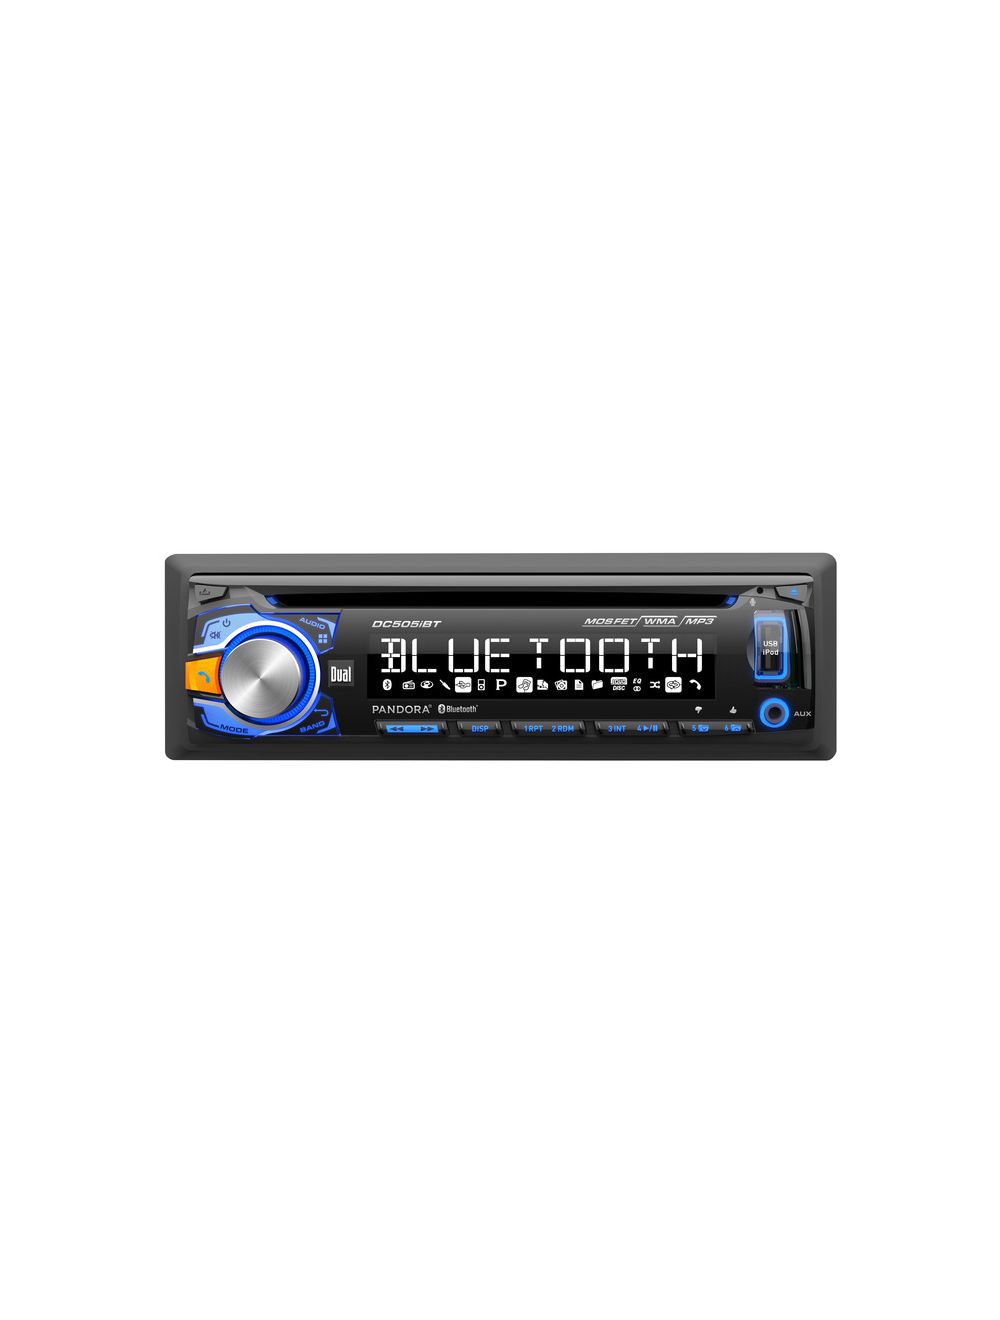 Dual Audio Video DC505IBT CD Receiver with Bluetooth